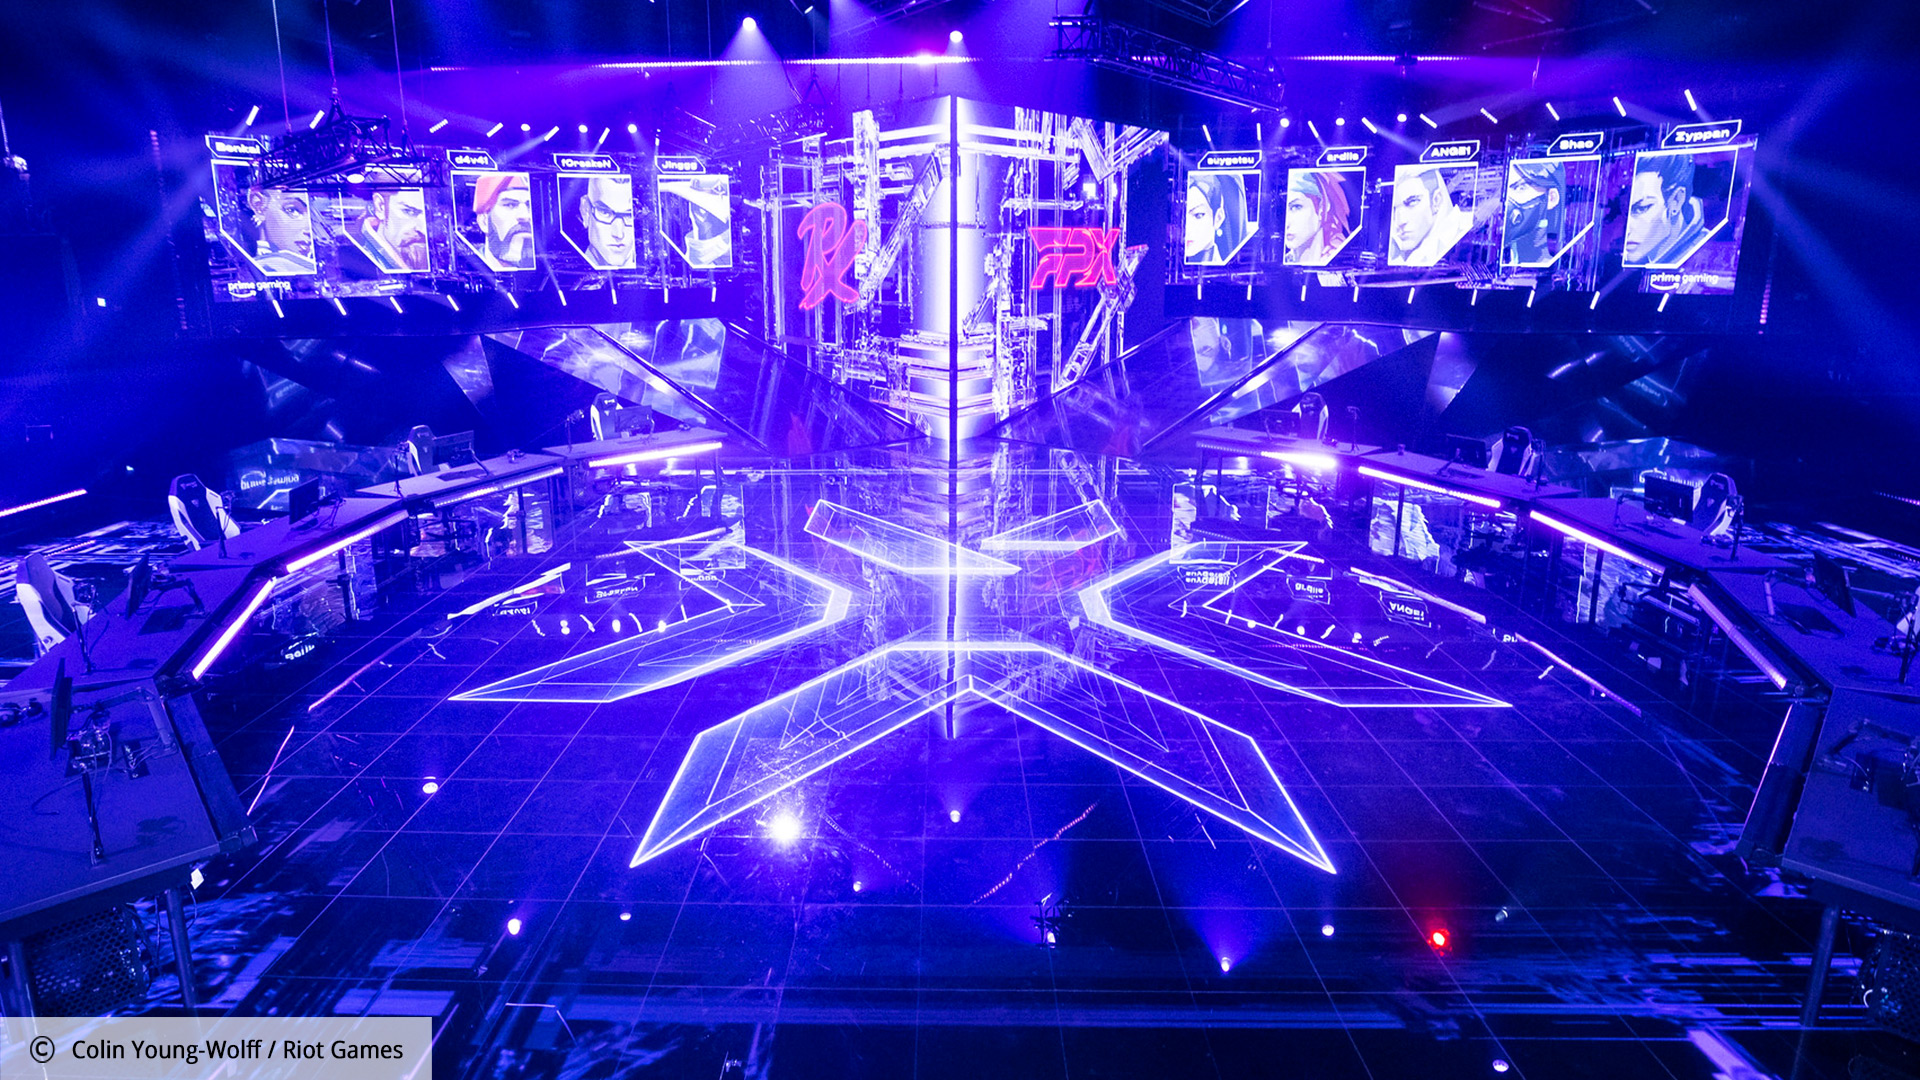 Riot Games reveales Valorant Champions Tour 2023: Overview and Schedule